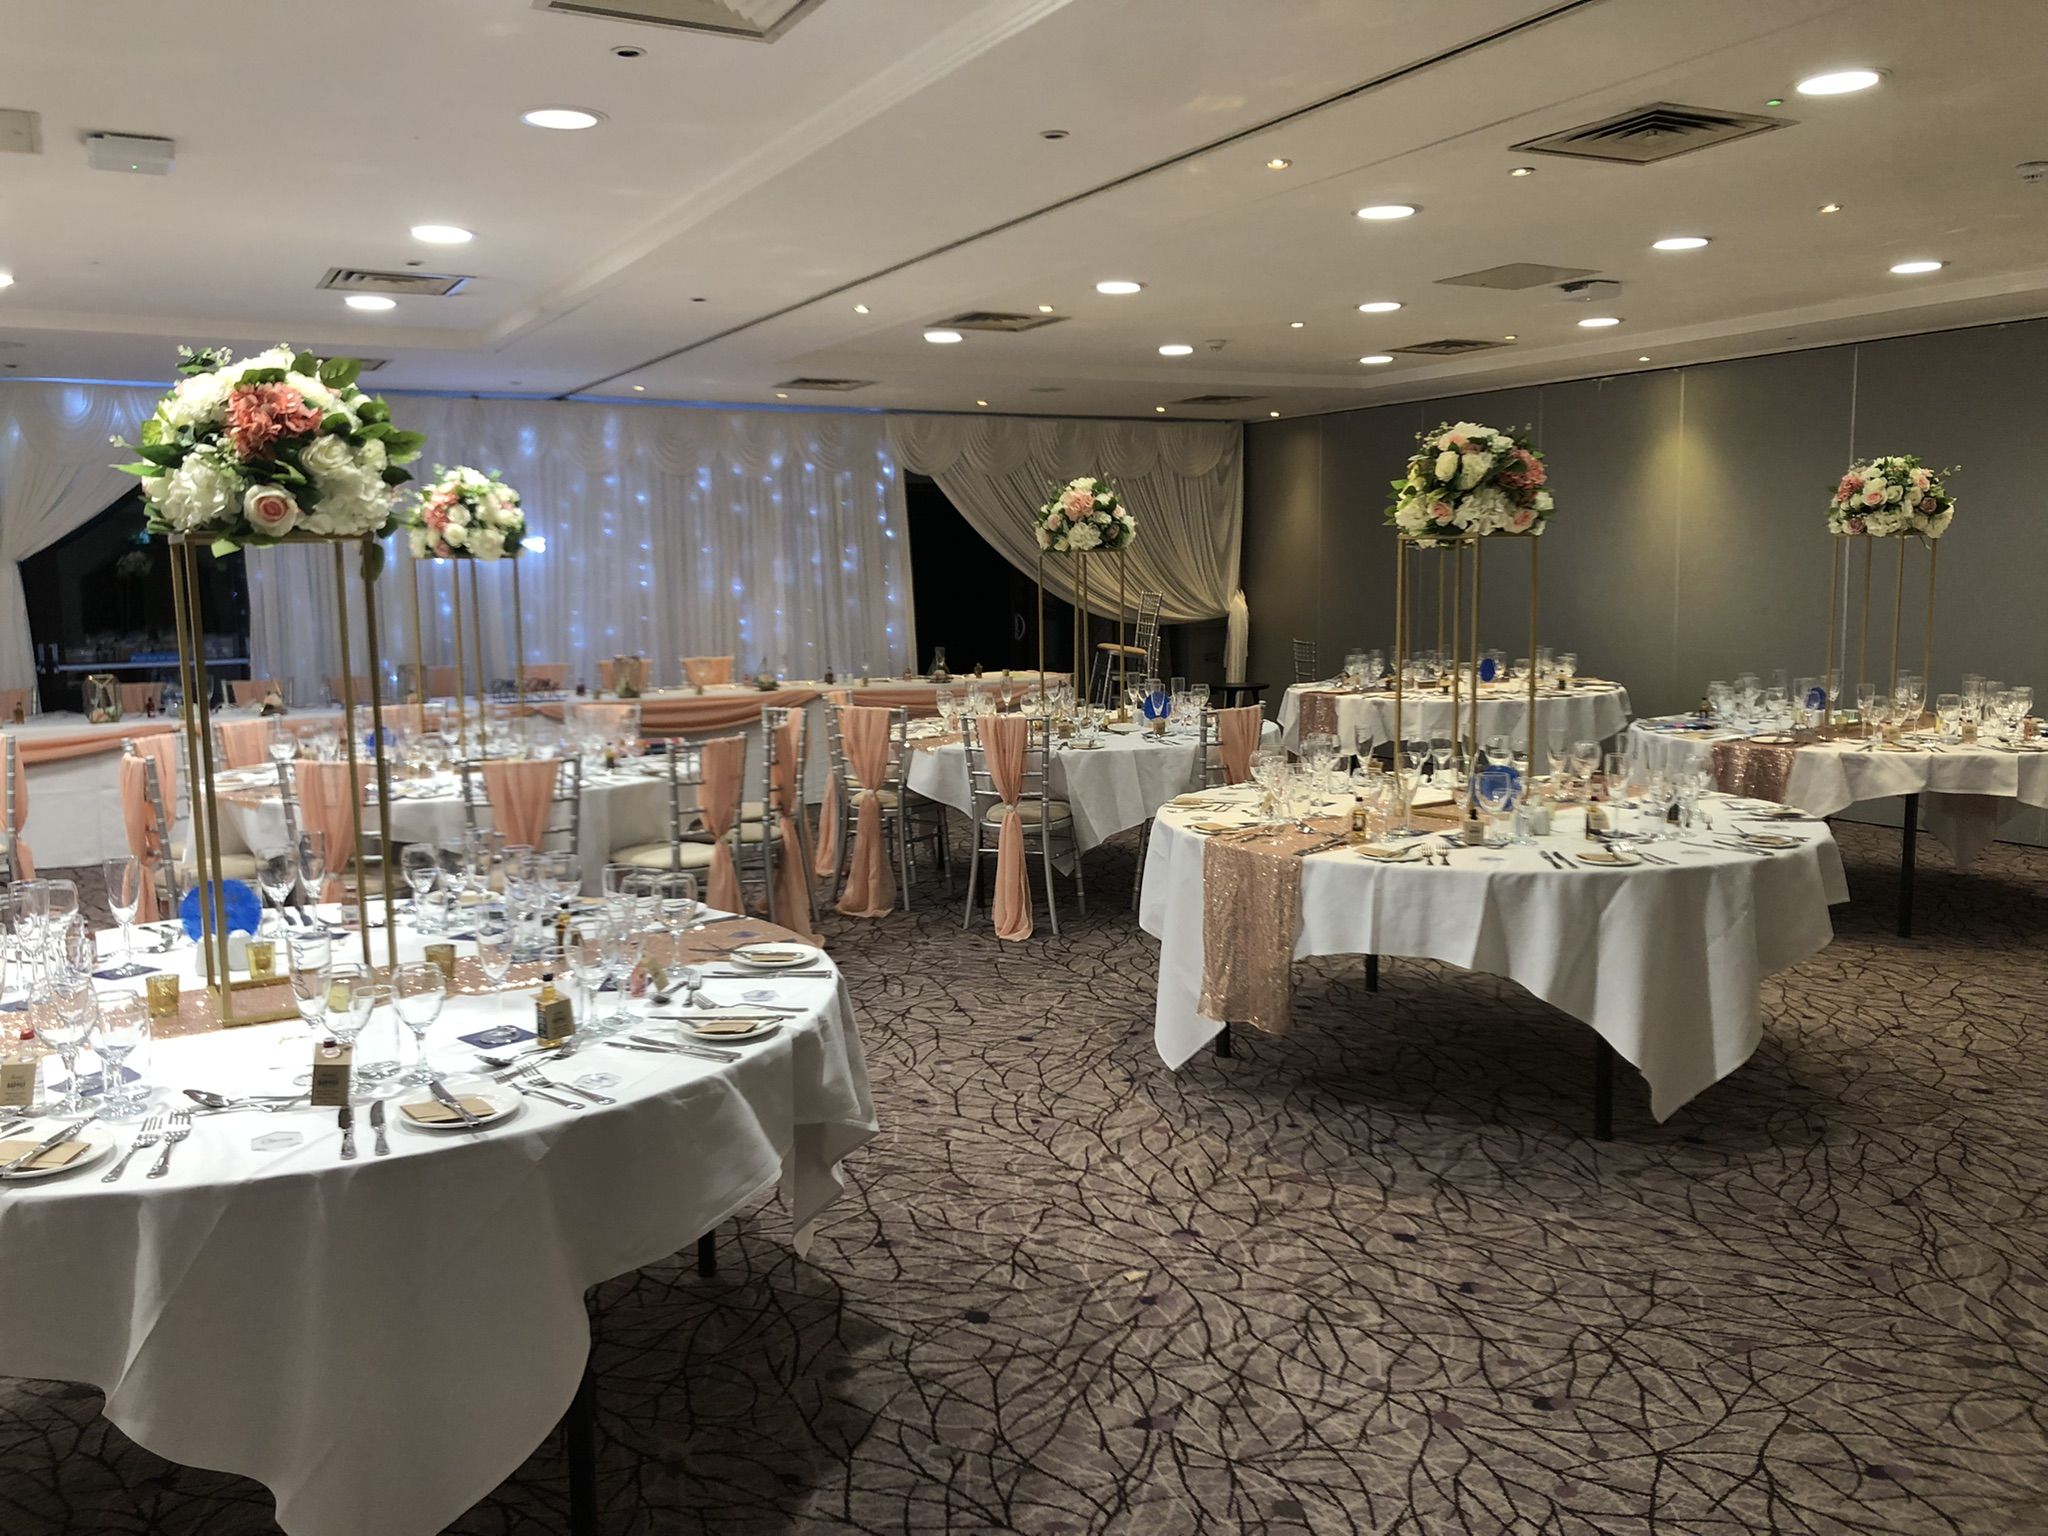 a banquet room set up for a formal function.